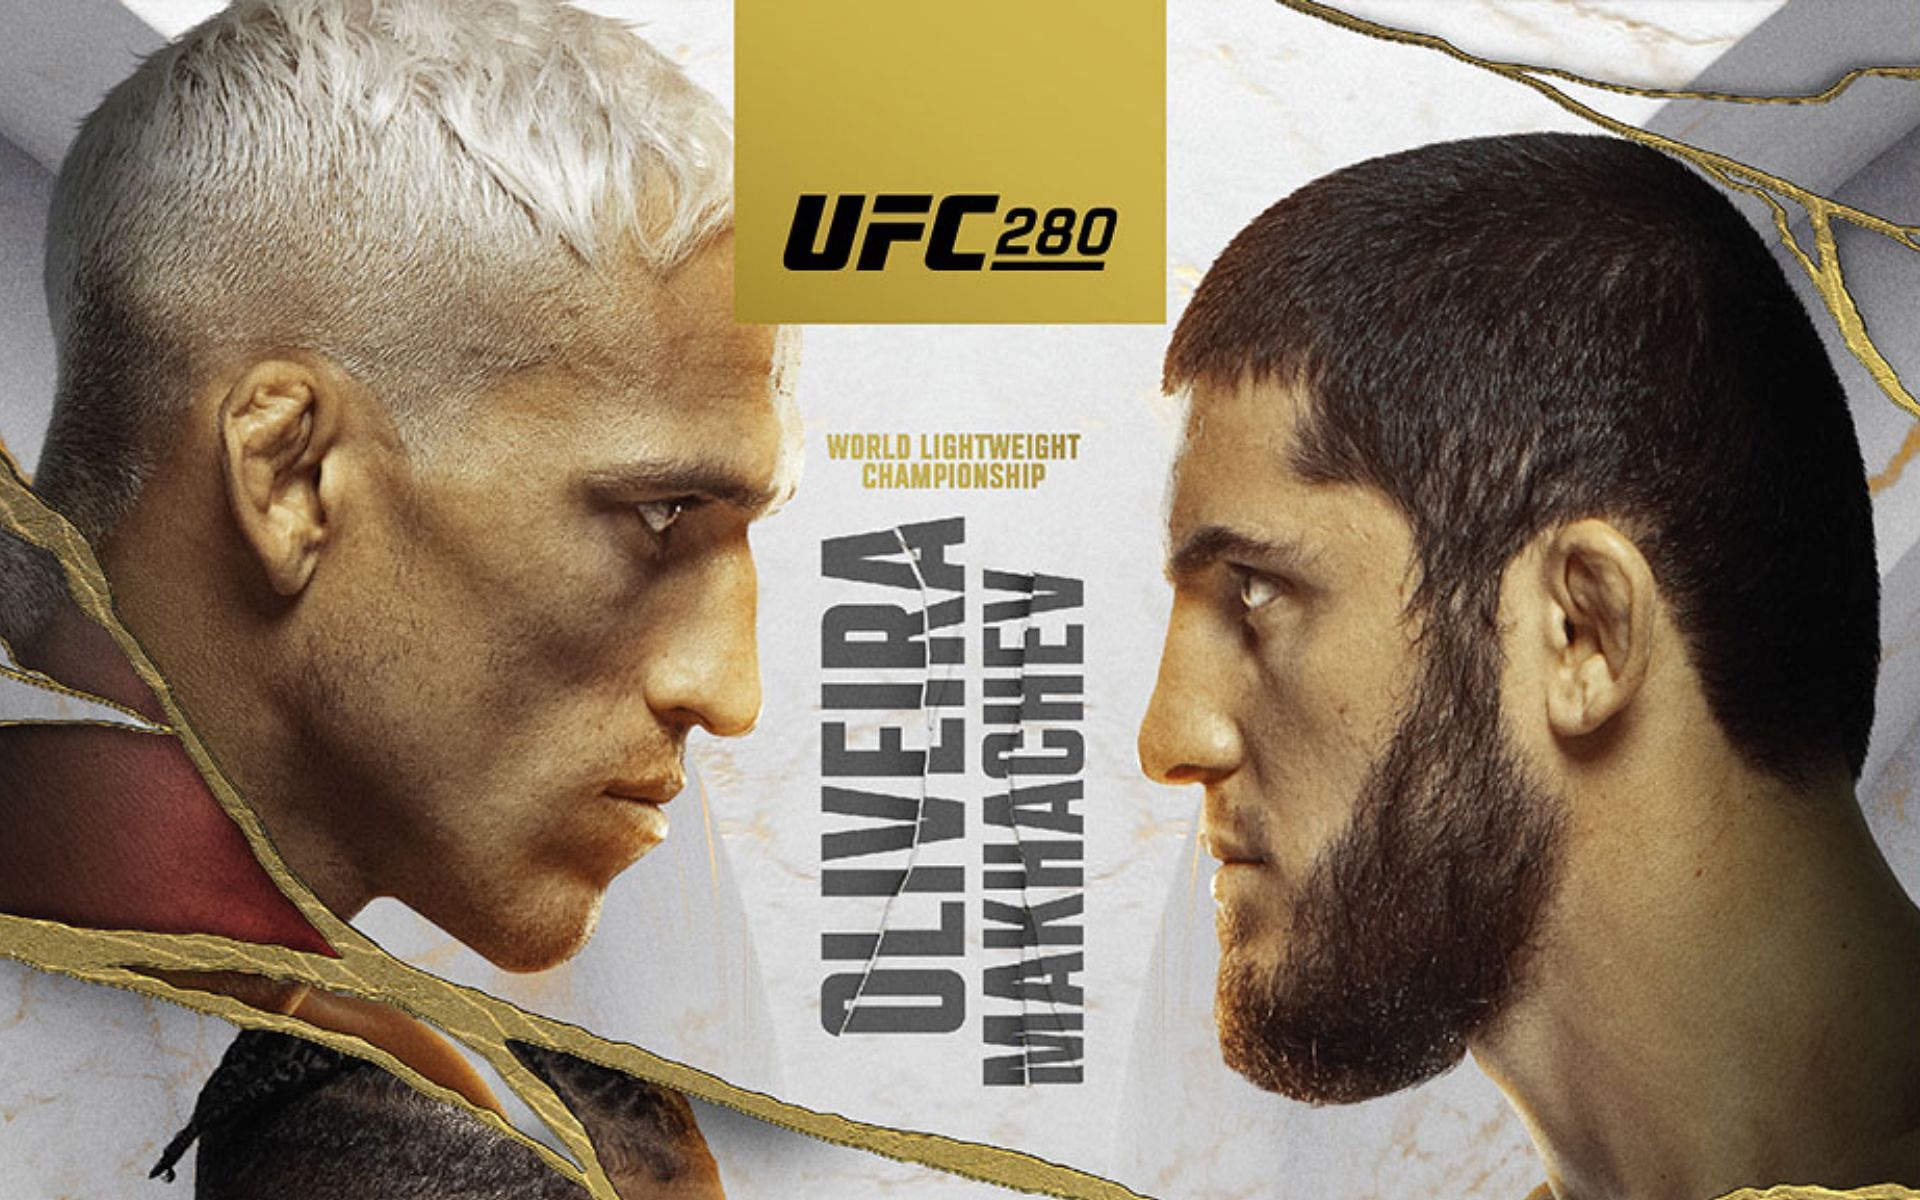 UFC 280 fight poster [Images courtesy of @btsportufc on Twitter]